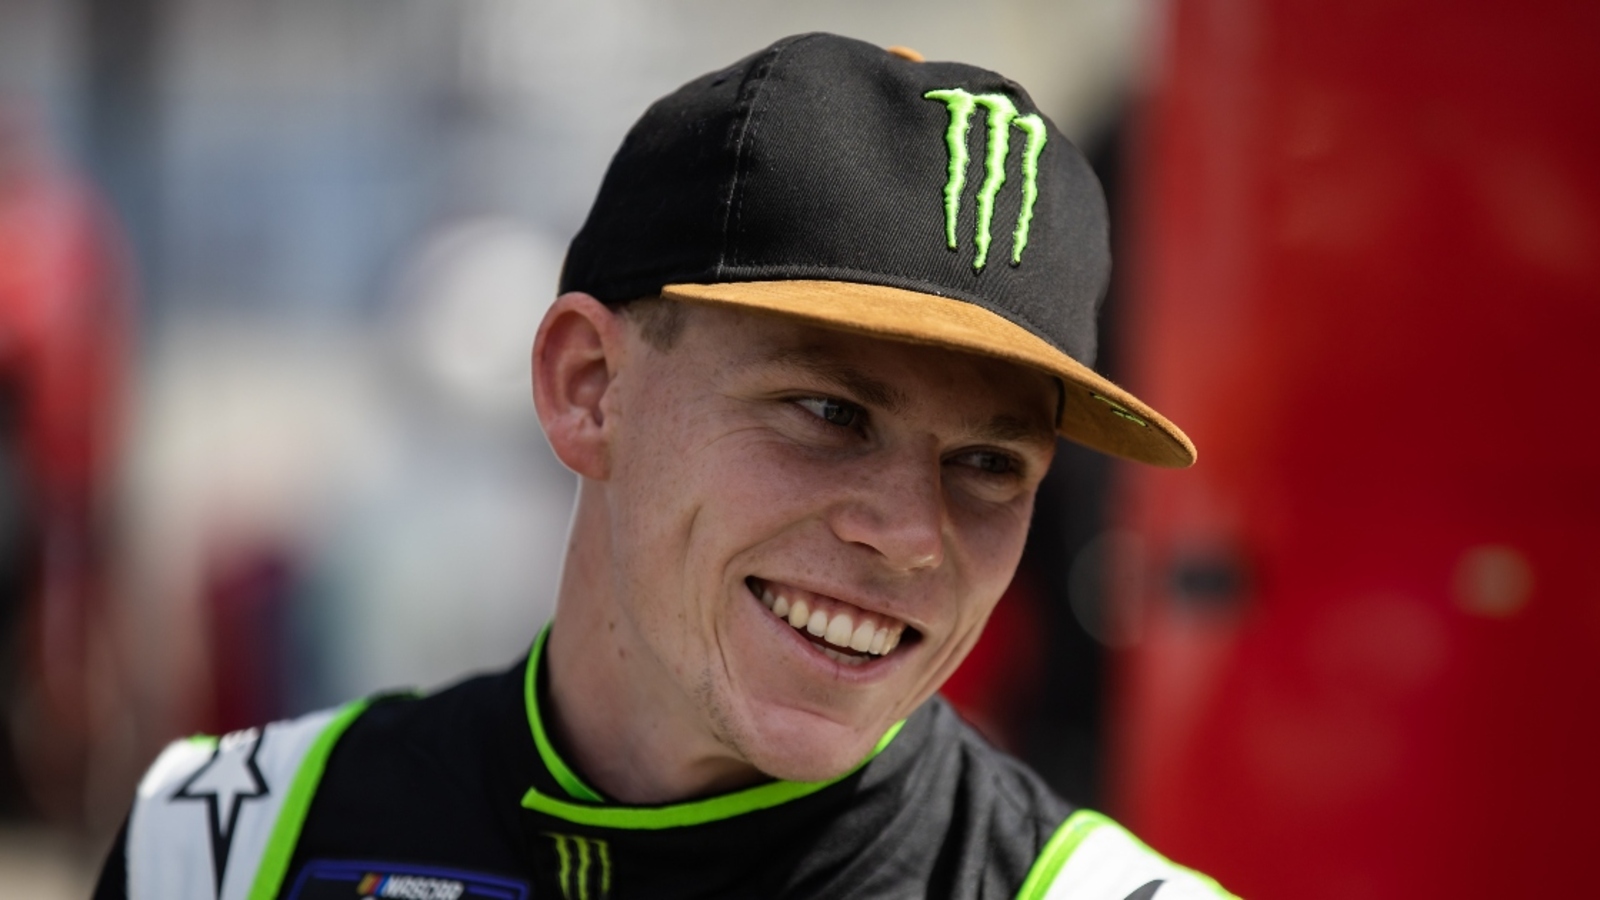 Riley Herbst reveals he has offers to race in all three NASCAR national series for 2025